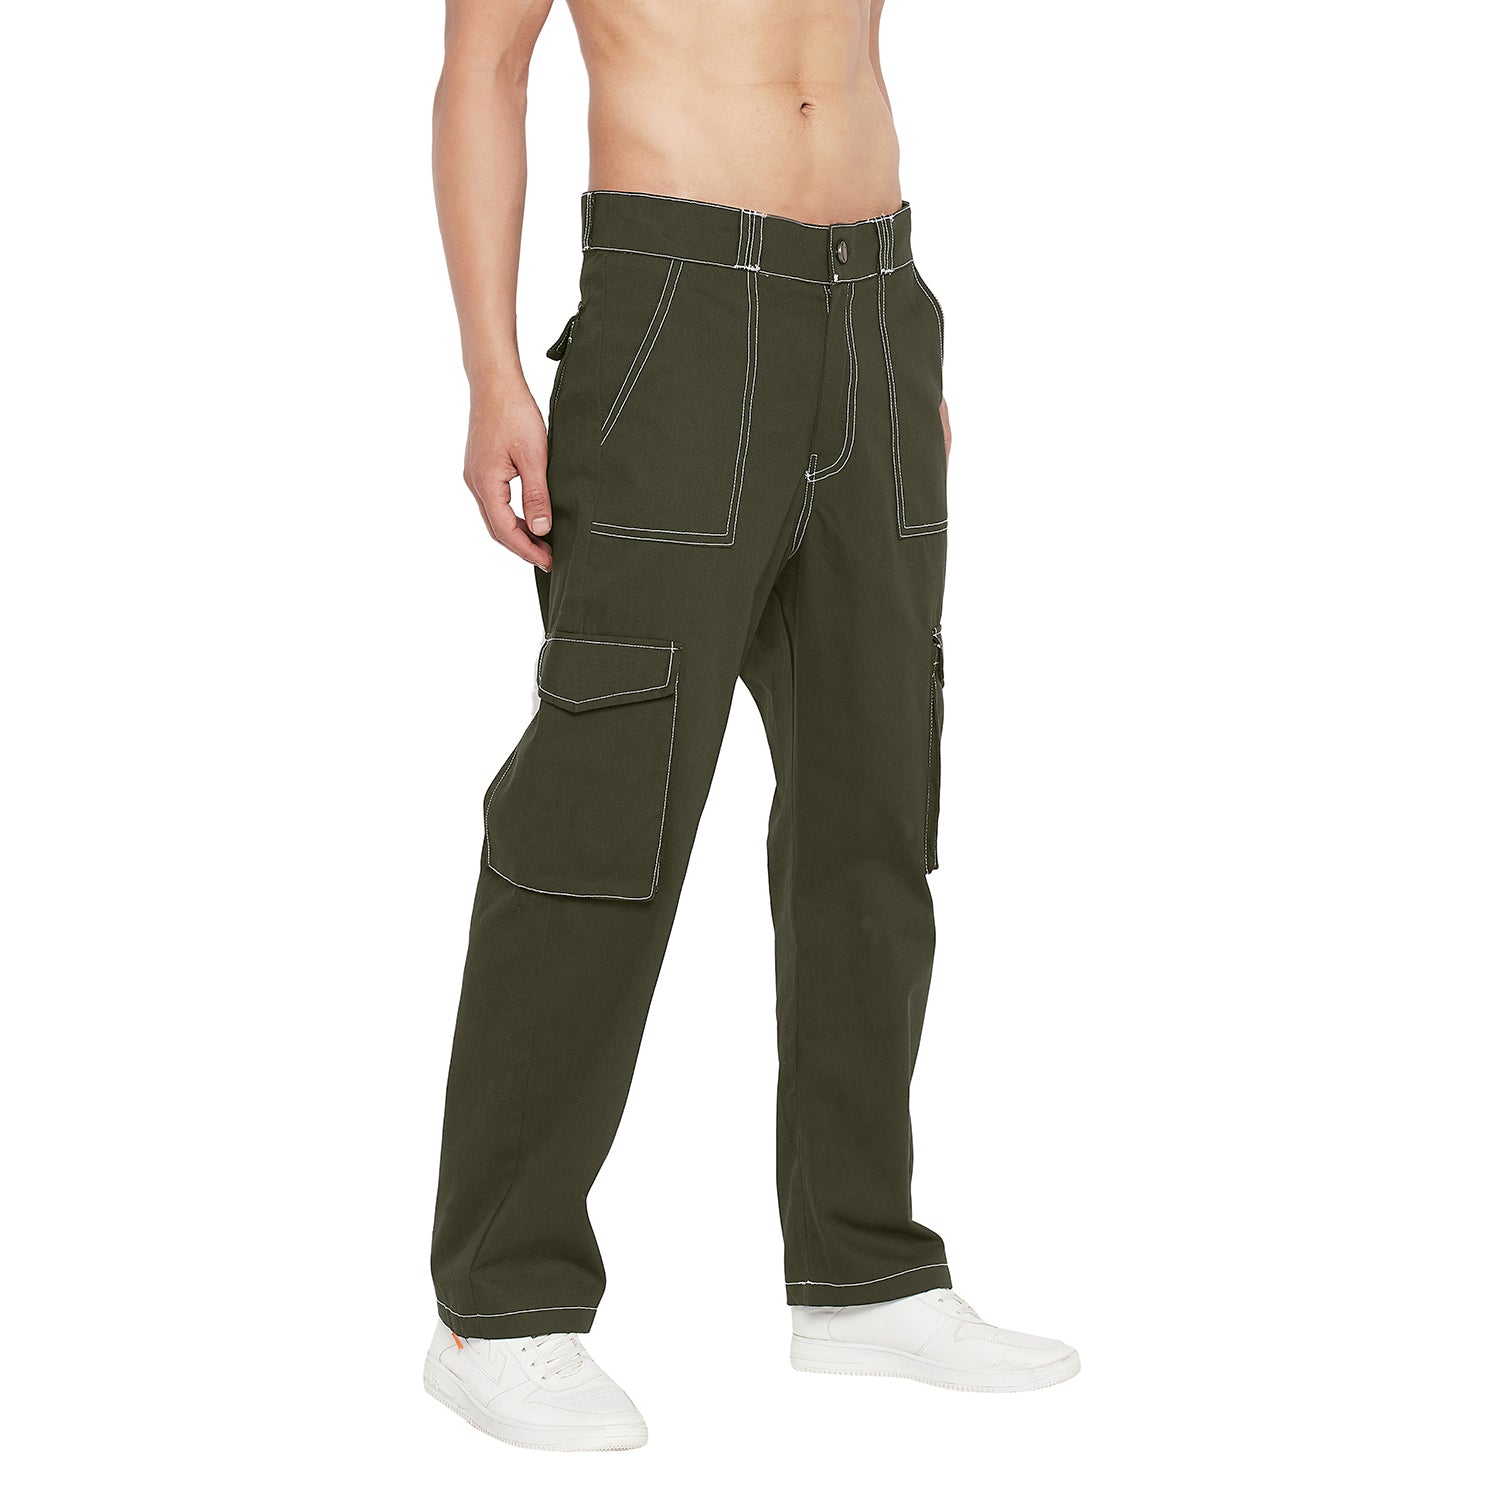 IHDR-502-OLV - 11oz Cotton Whipcord Cargo Pants - Olive | James Dant